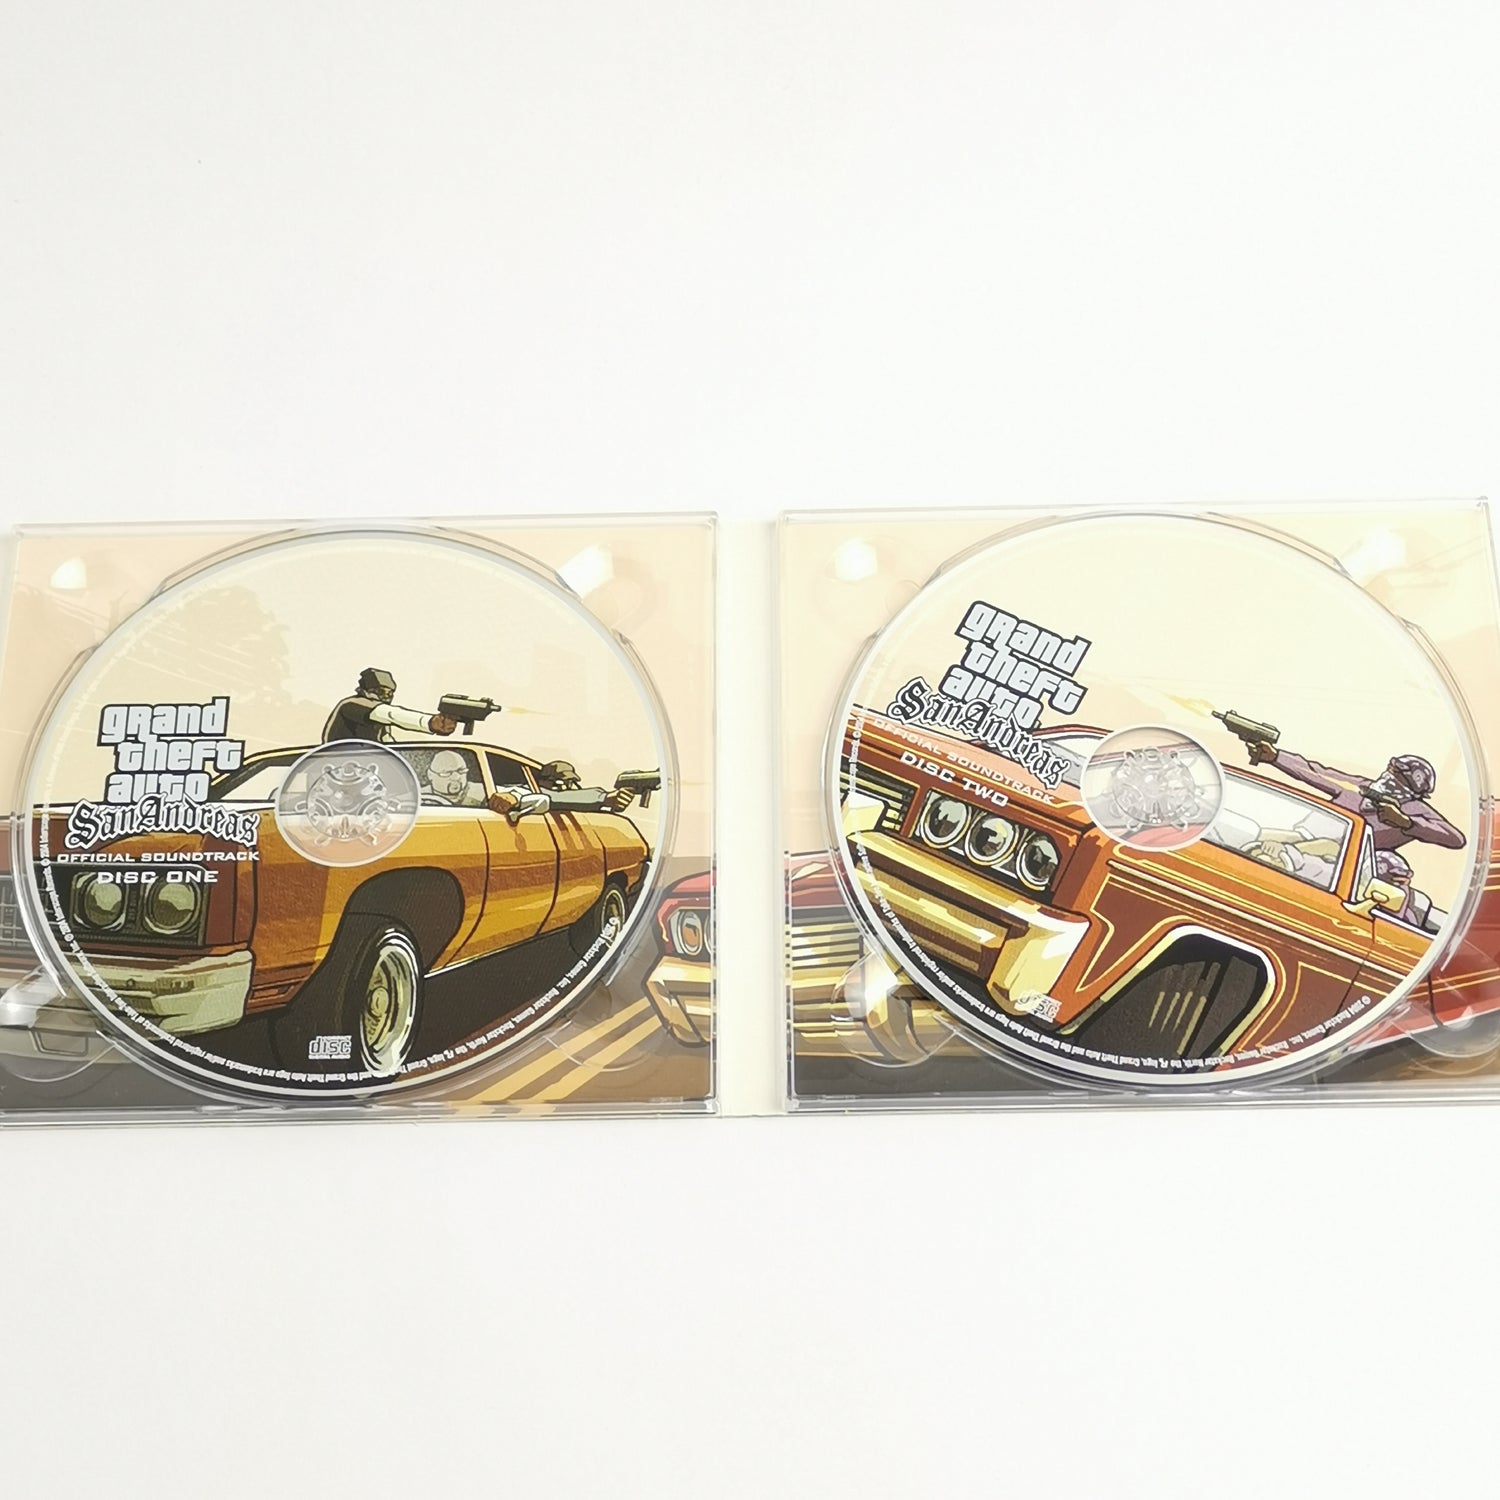 Official soundtrack CD for the game: Grand Theft Auto San Andreas - GTA PS2